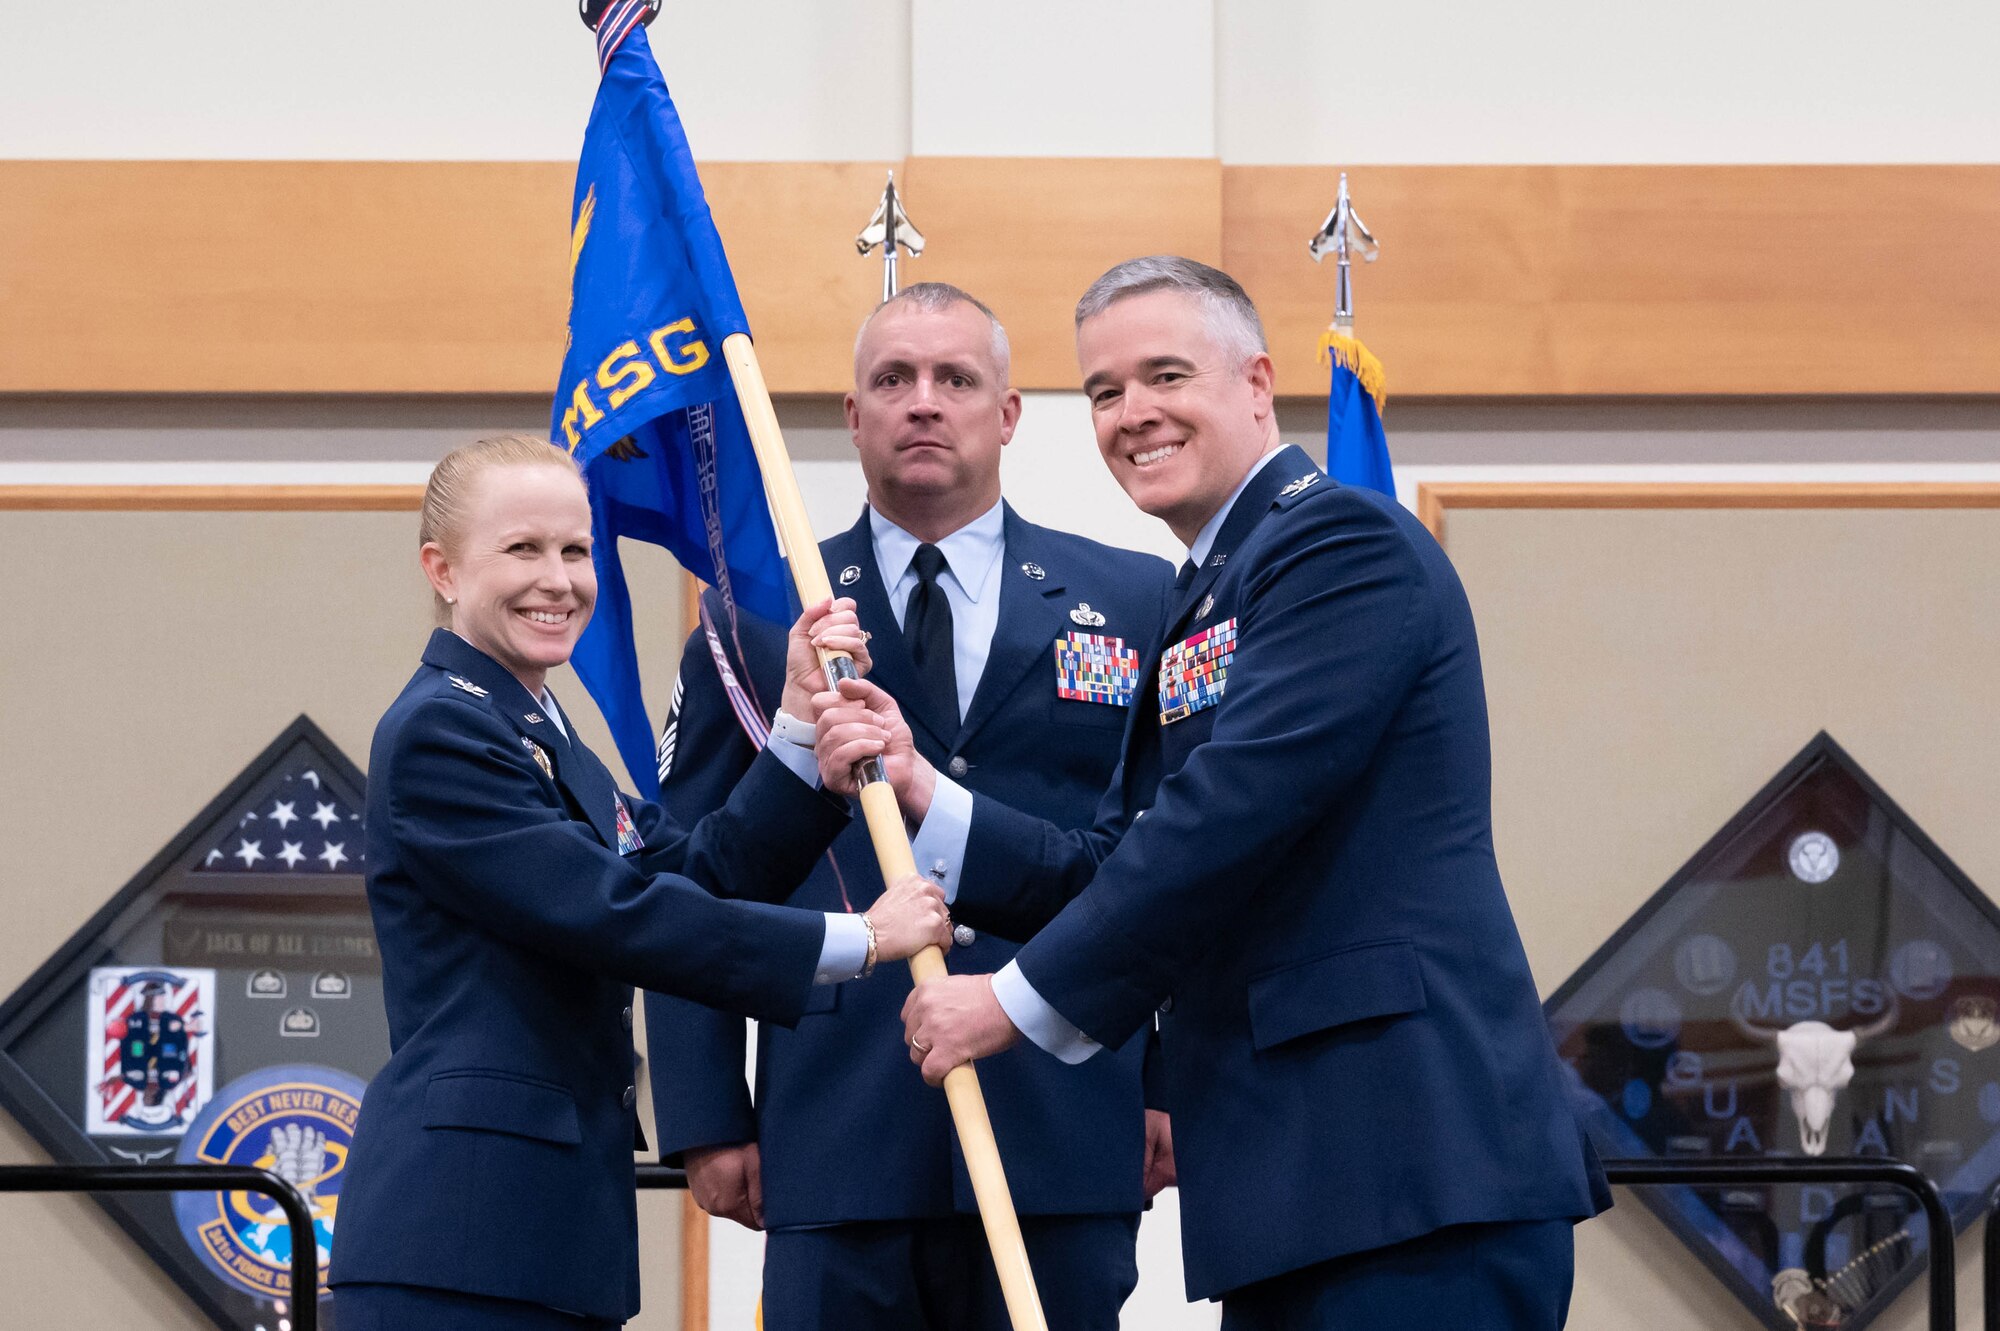 Col. Christopher Karns, right, accepts command of the 341st Mission Support Group from Col. Anita Feugate Opperman, 341st Missile Wing commander, during a change of command ceremony July 28, 2021, at Malmstrom Air Force Base, Mont.